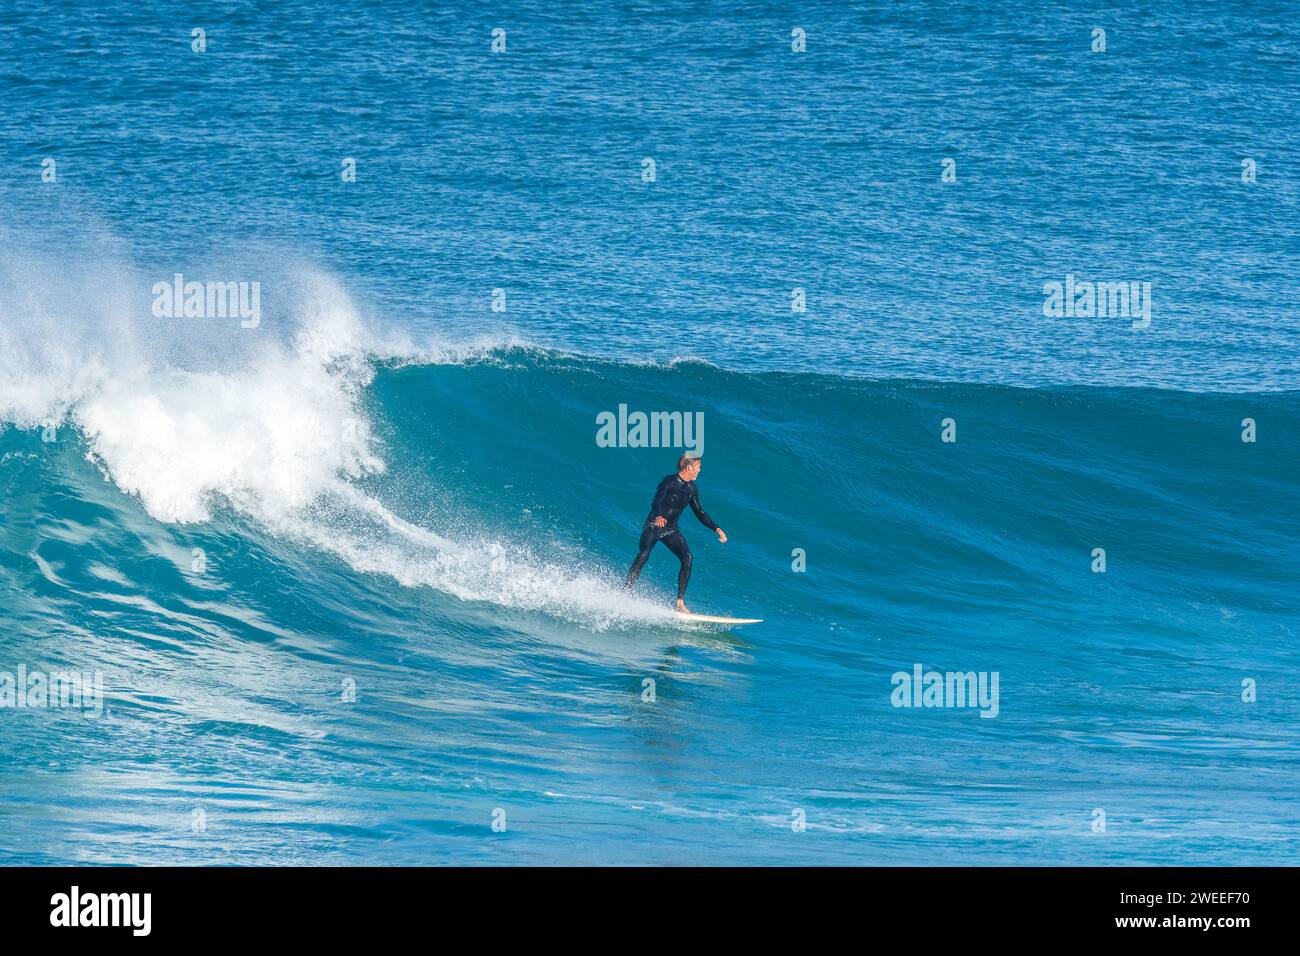 Surfing the wave in Carrapateira, Portugal Stock Photo